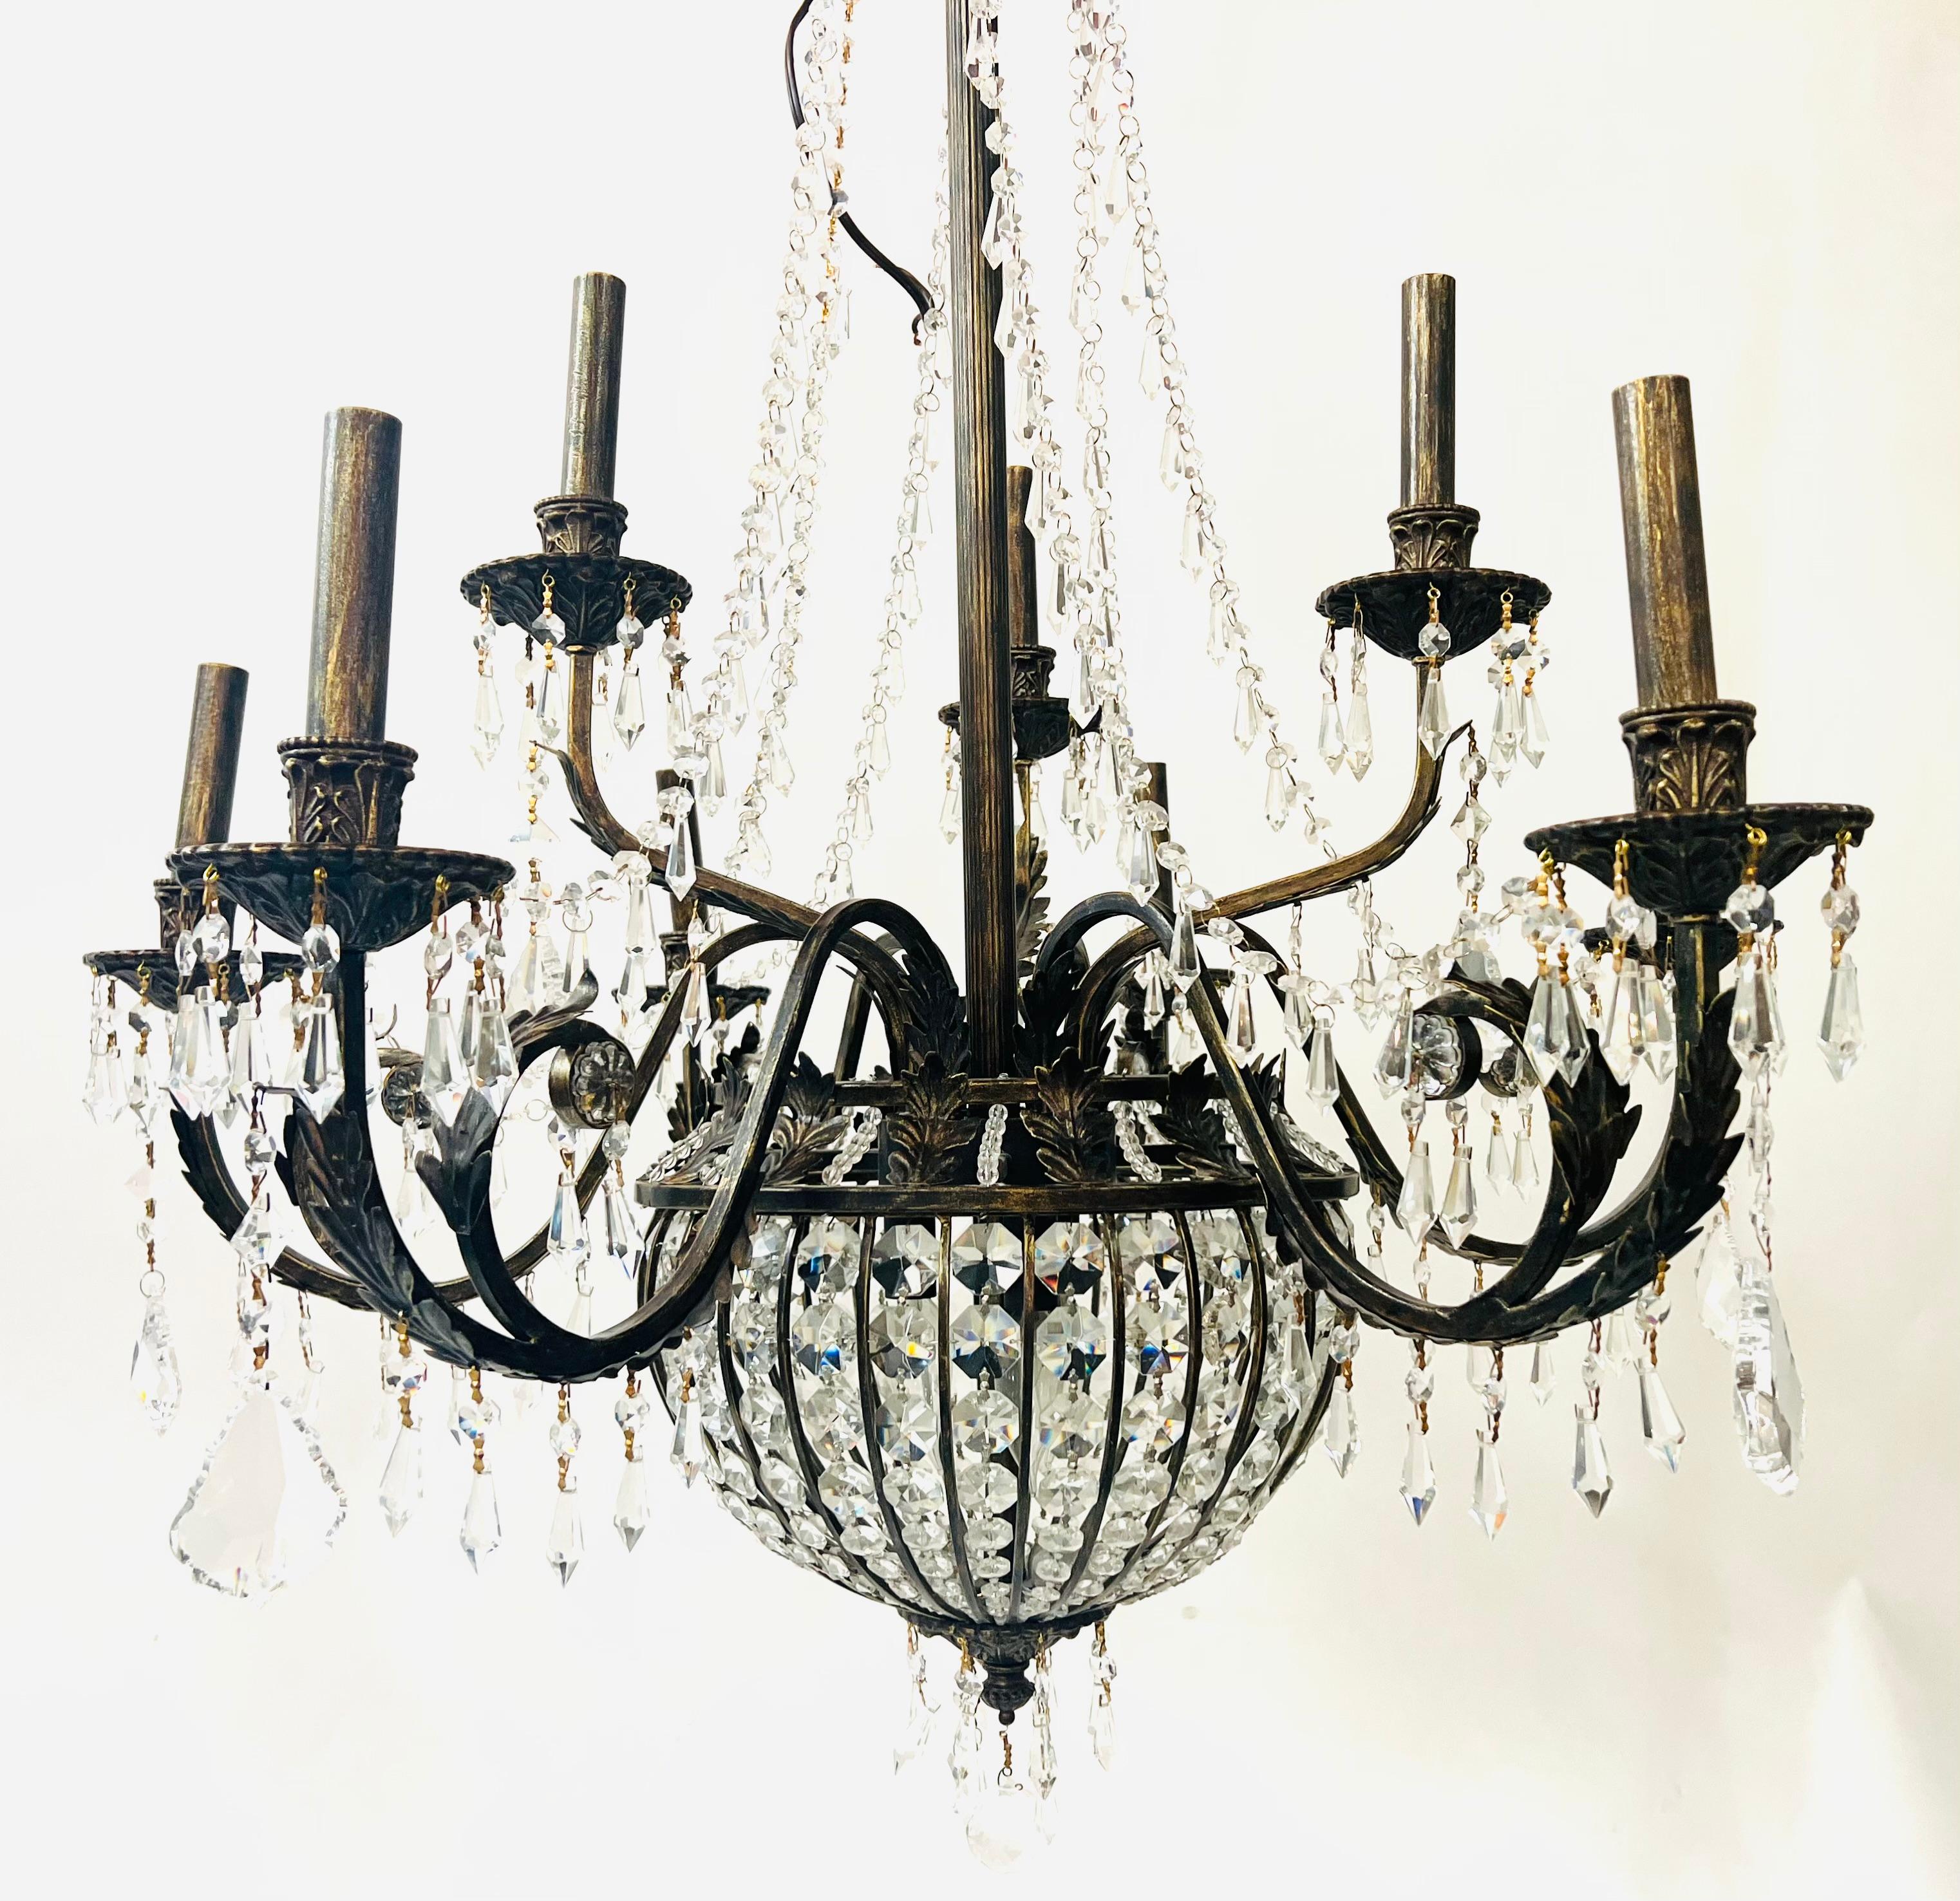 An early 20th century French Regency Empire bronze and cut-crystal basket chandelier. Featuring 9 large arms ending with French style bobeche in bronze embellished with crystals and large facetted drops. Crystal swags adding style to this refined